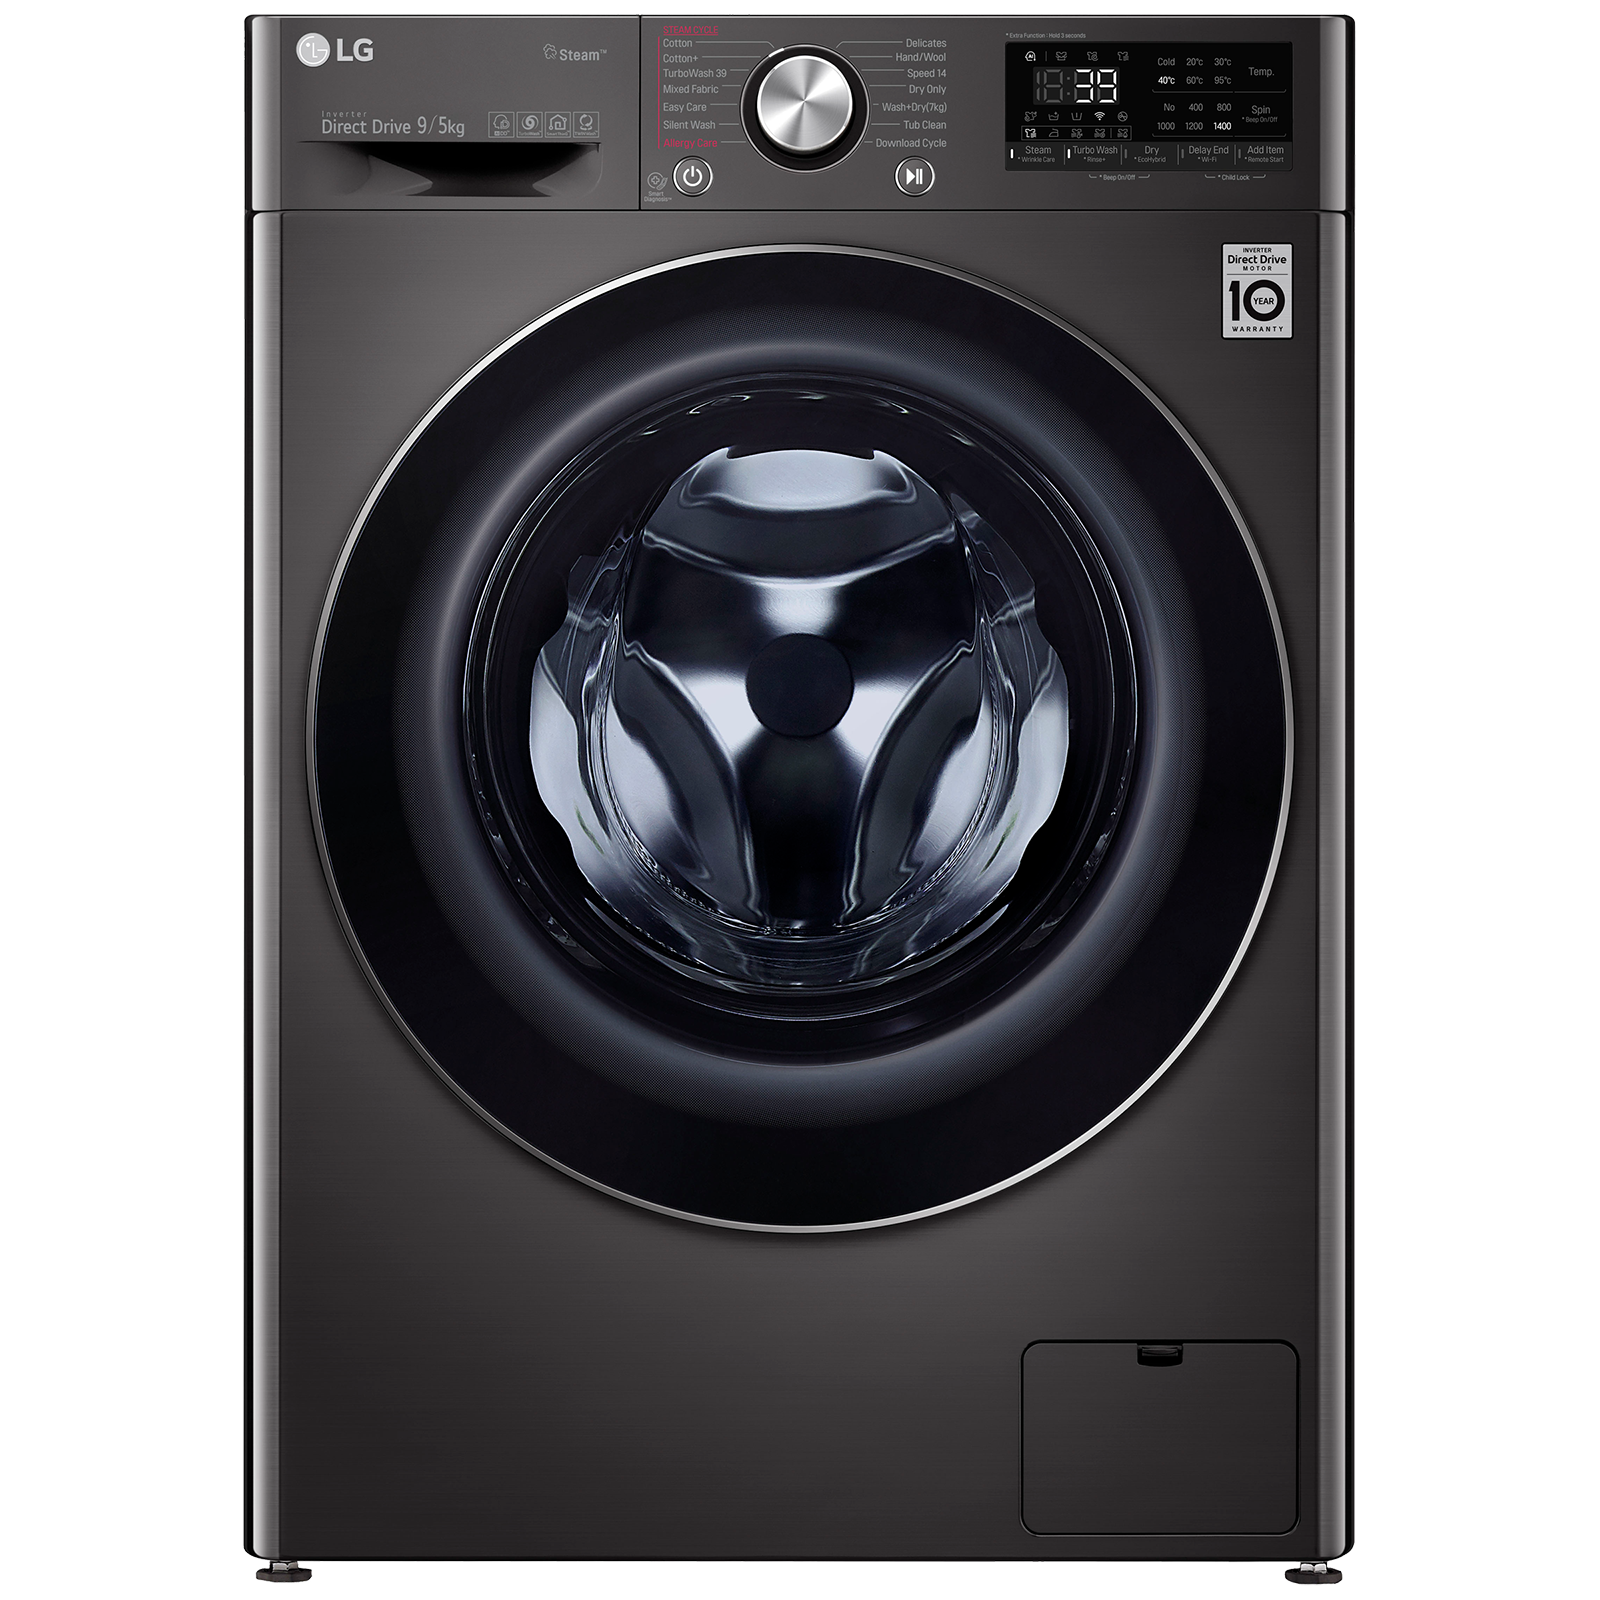 LG 9/5 kg 5 Star Fully Automatic Front Load Washer Dryer(FHD0905STB.ABLQEIL, In-built Heater, Black)